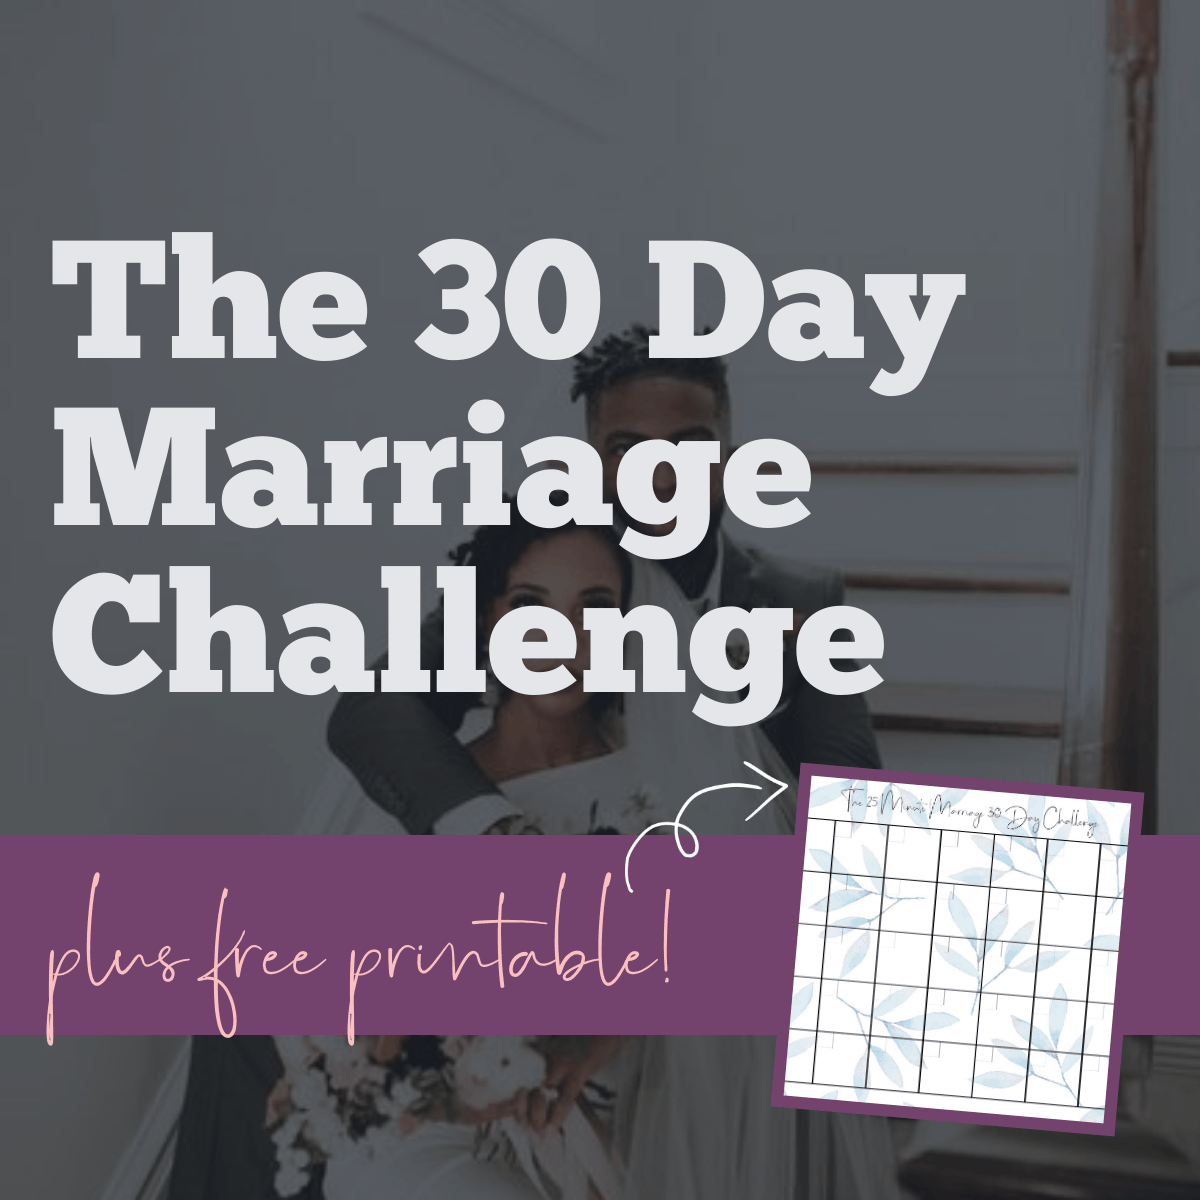 The 30 Day Marriage Challenge (In 25 Minutes a day)